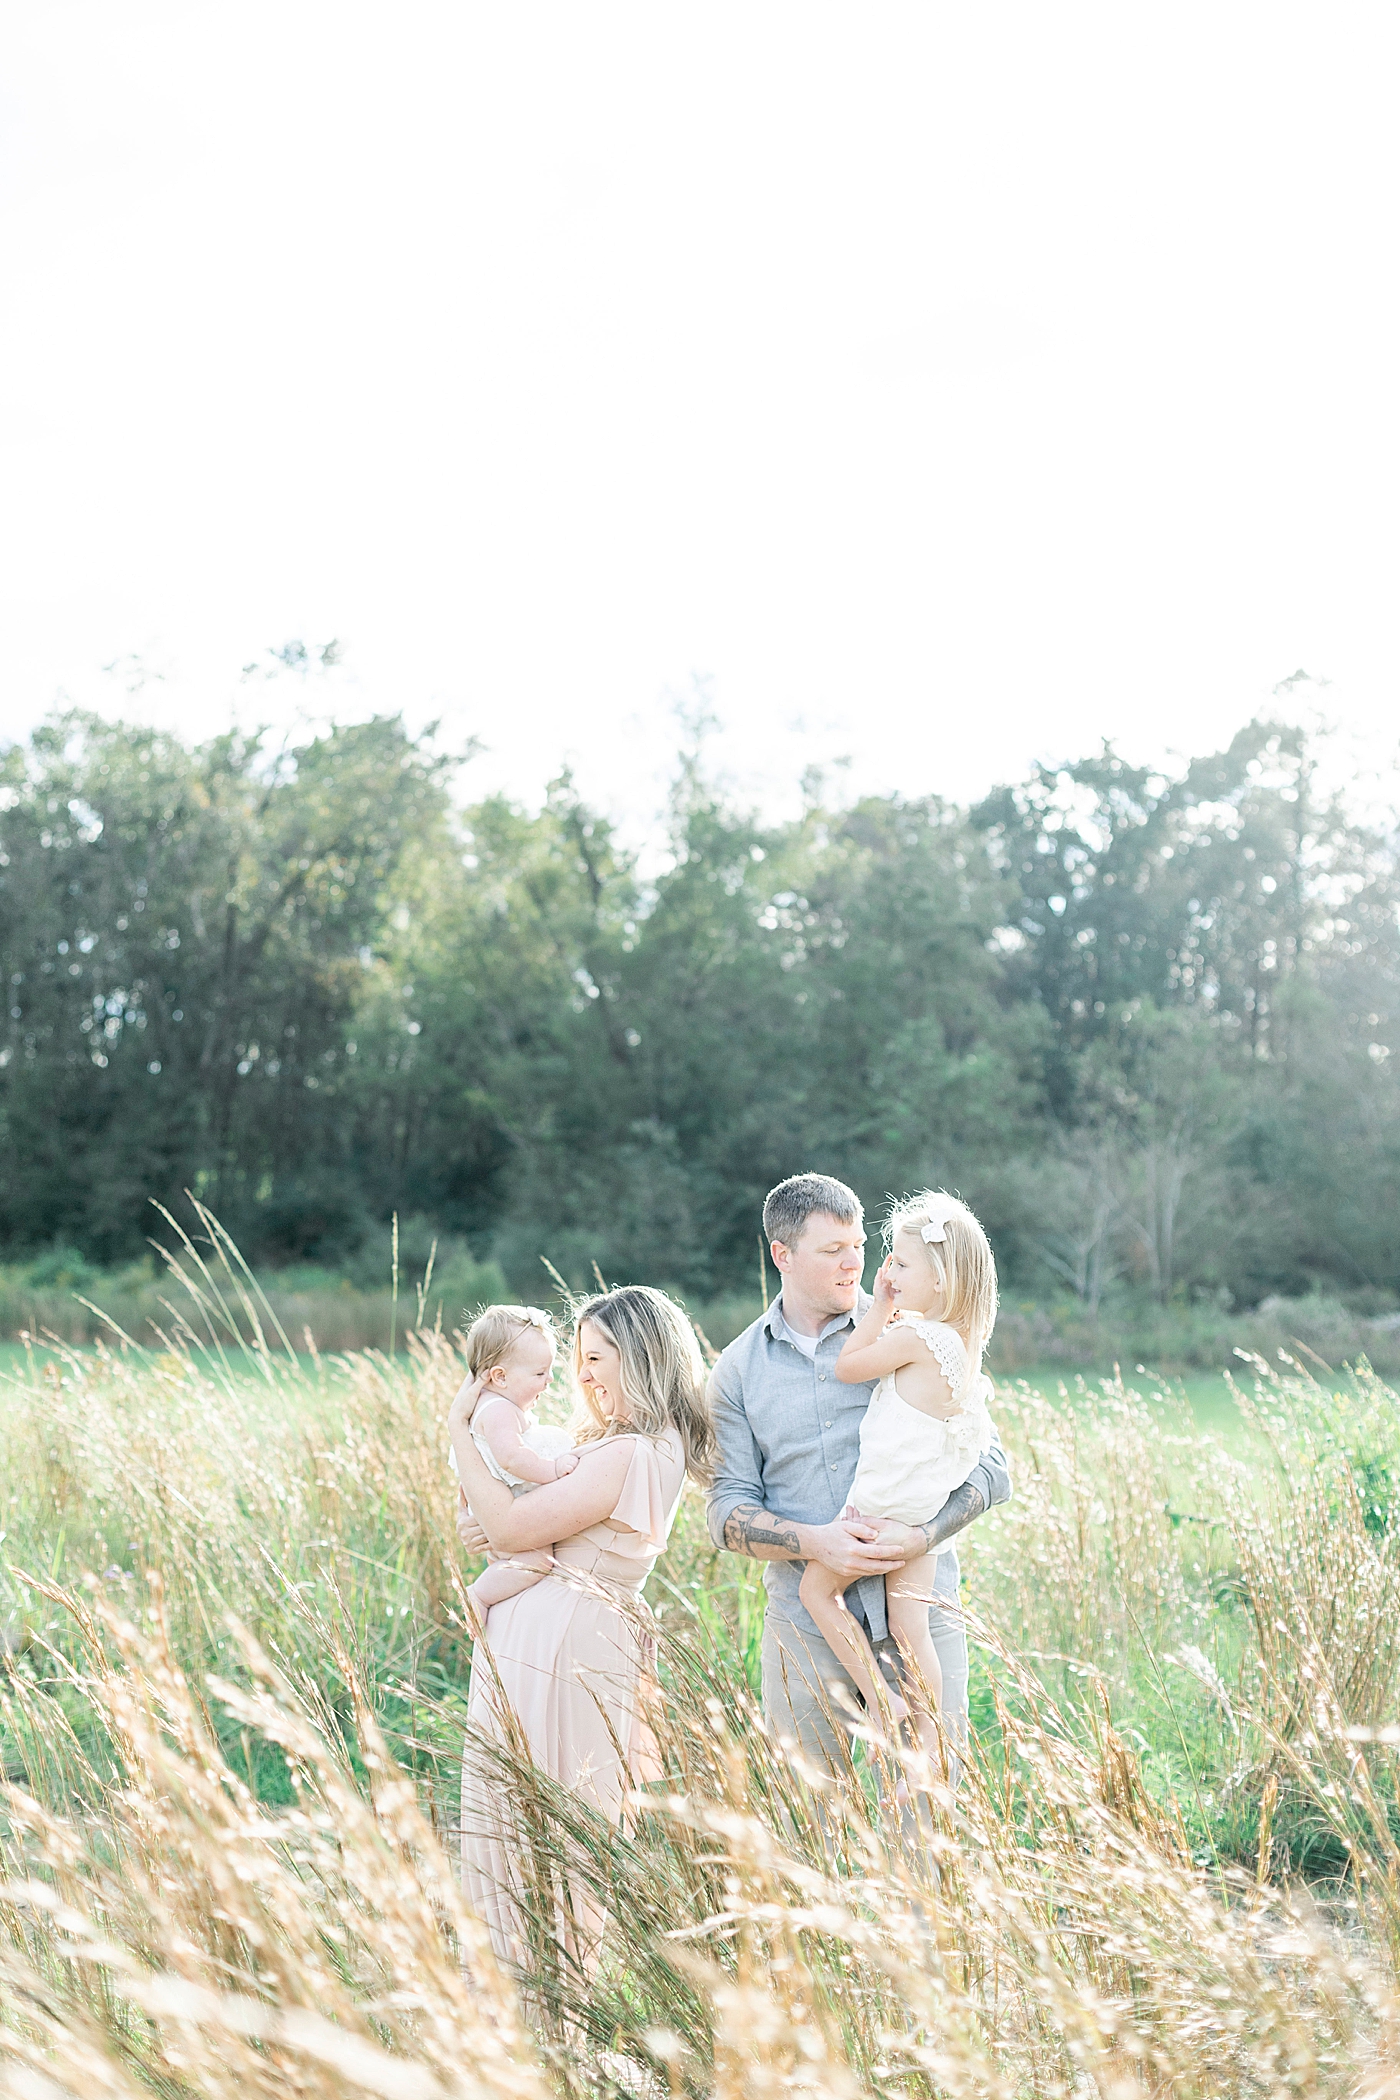 Family snuggling in a field | Photo by Hattiesburg MS family photographer Little Sunshine Photography 